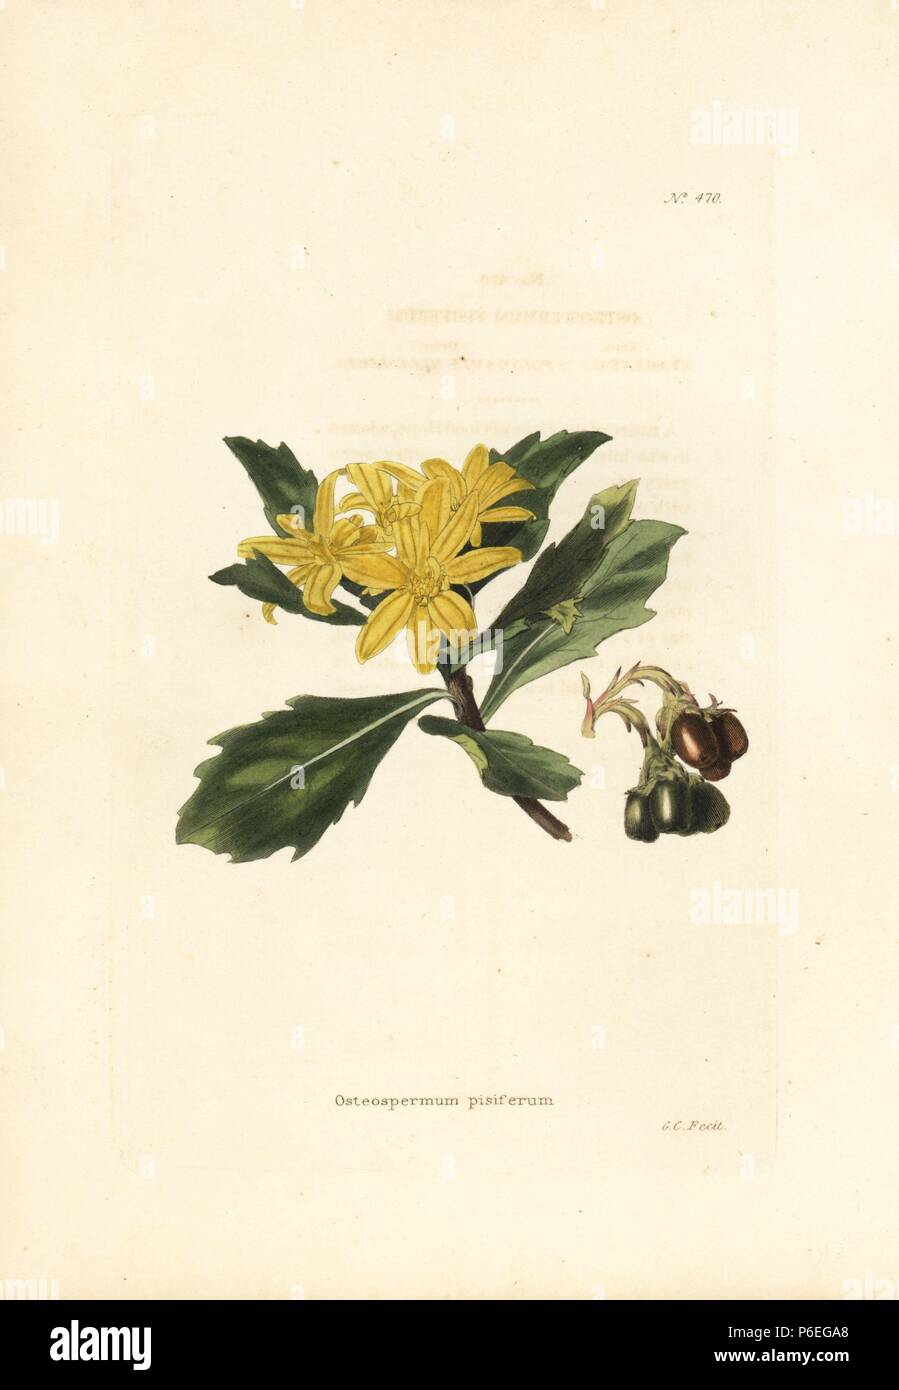 Boneseed or tick berry, Chrysanthemoides monilifera subsp. pisifera. Handcoloured copperplate engraving by George Cooke from Conrad Loddiges' Botanical Cabinet, London, 1810. Stock Photo